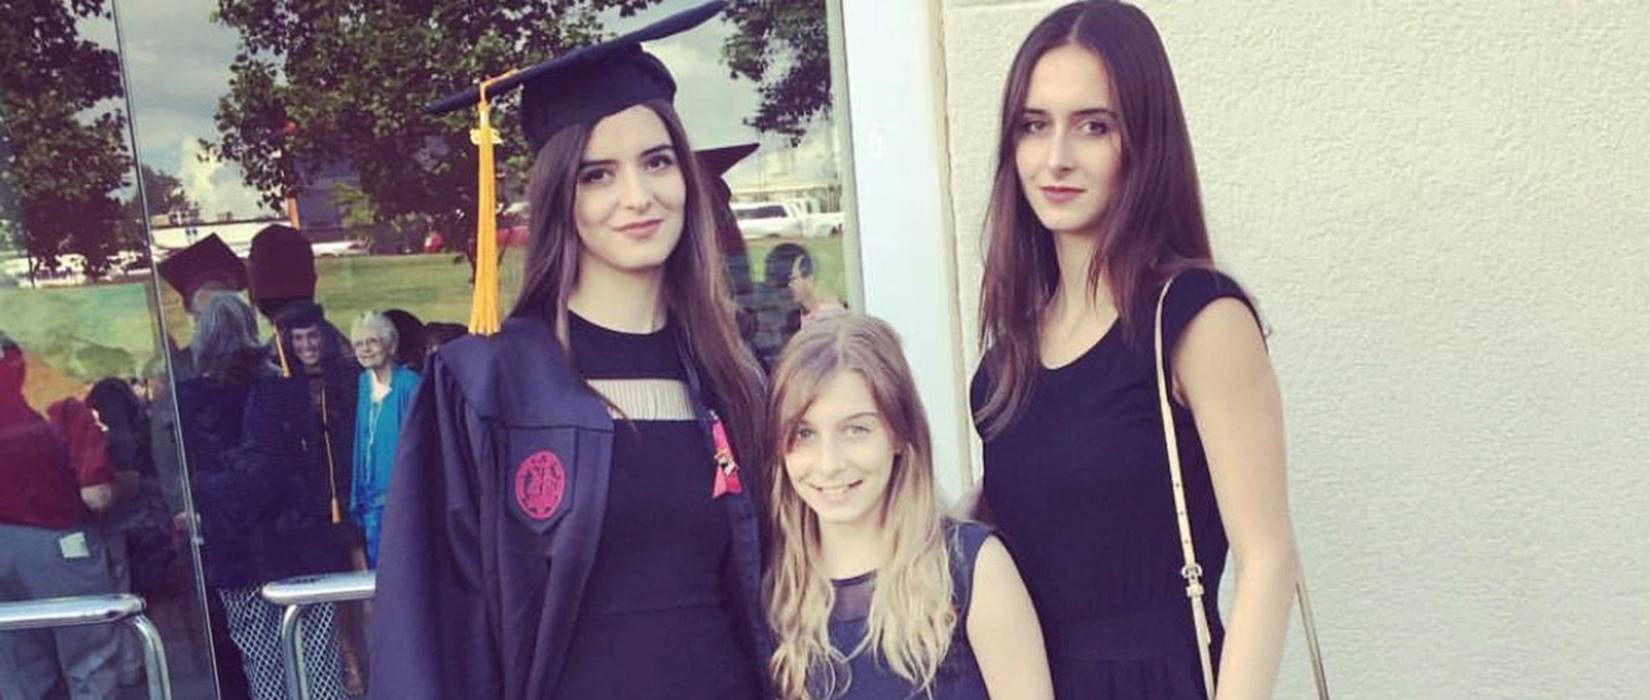 Adalin Quigley, left, and Daniella Kucherina, right, with their sister at Quigley's graduation.